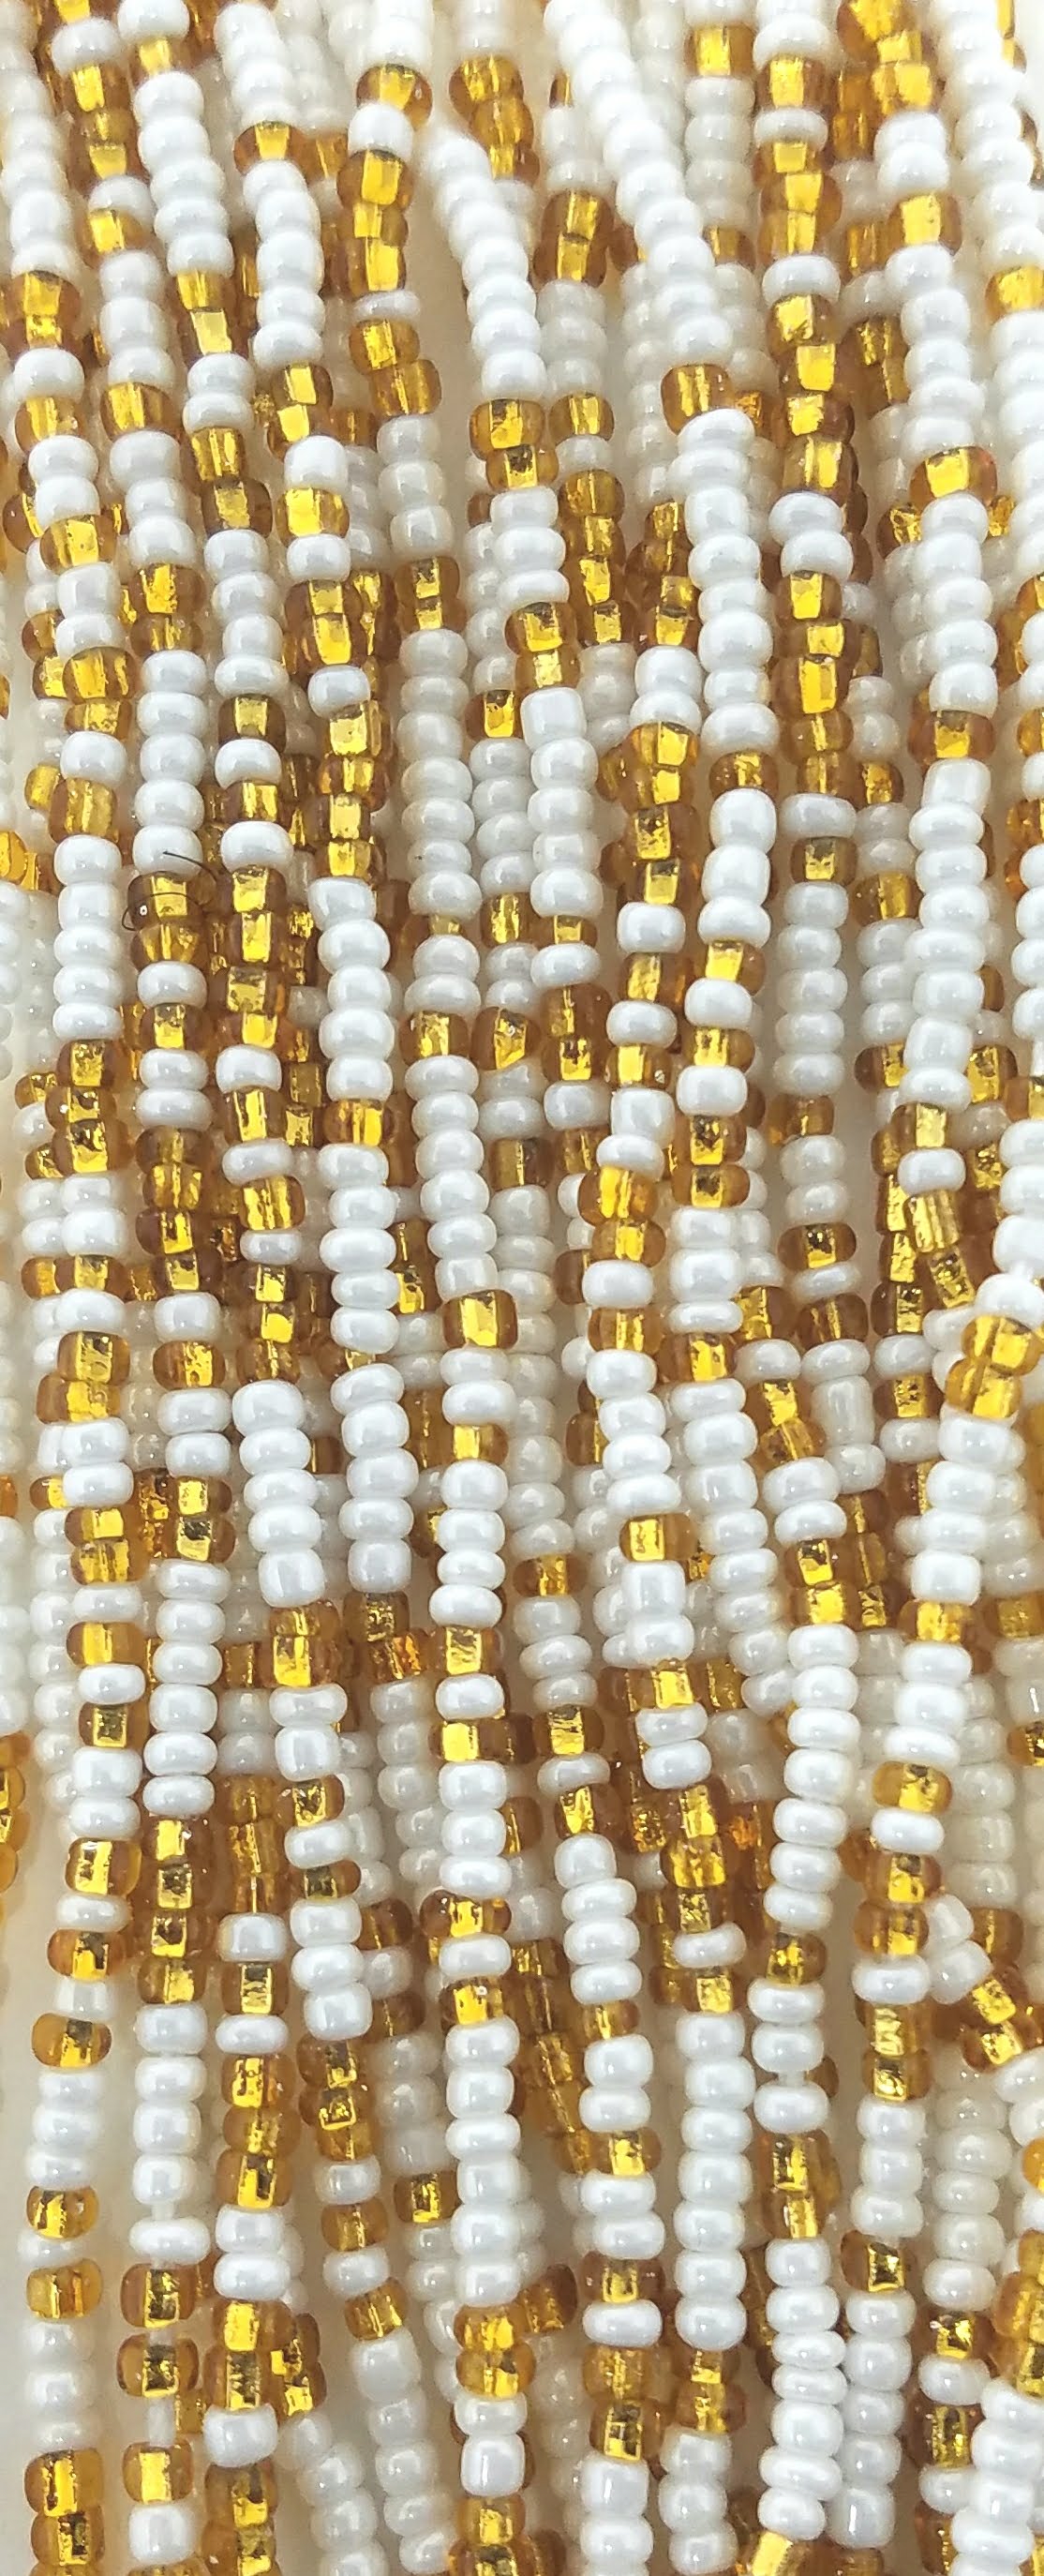 Gold and white tie-on waist beads